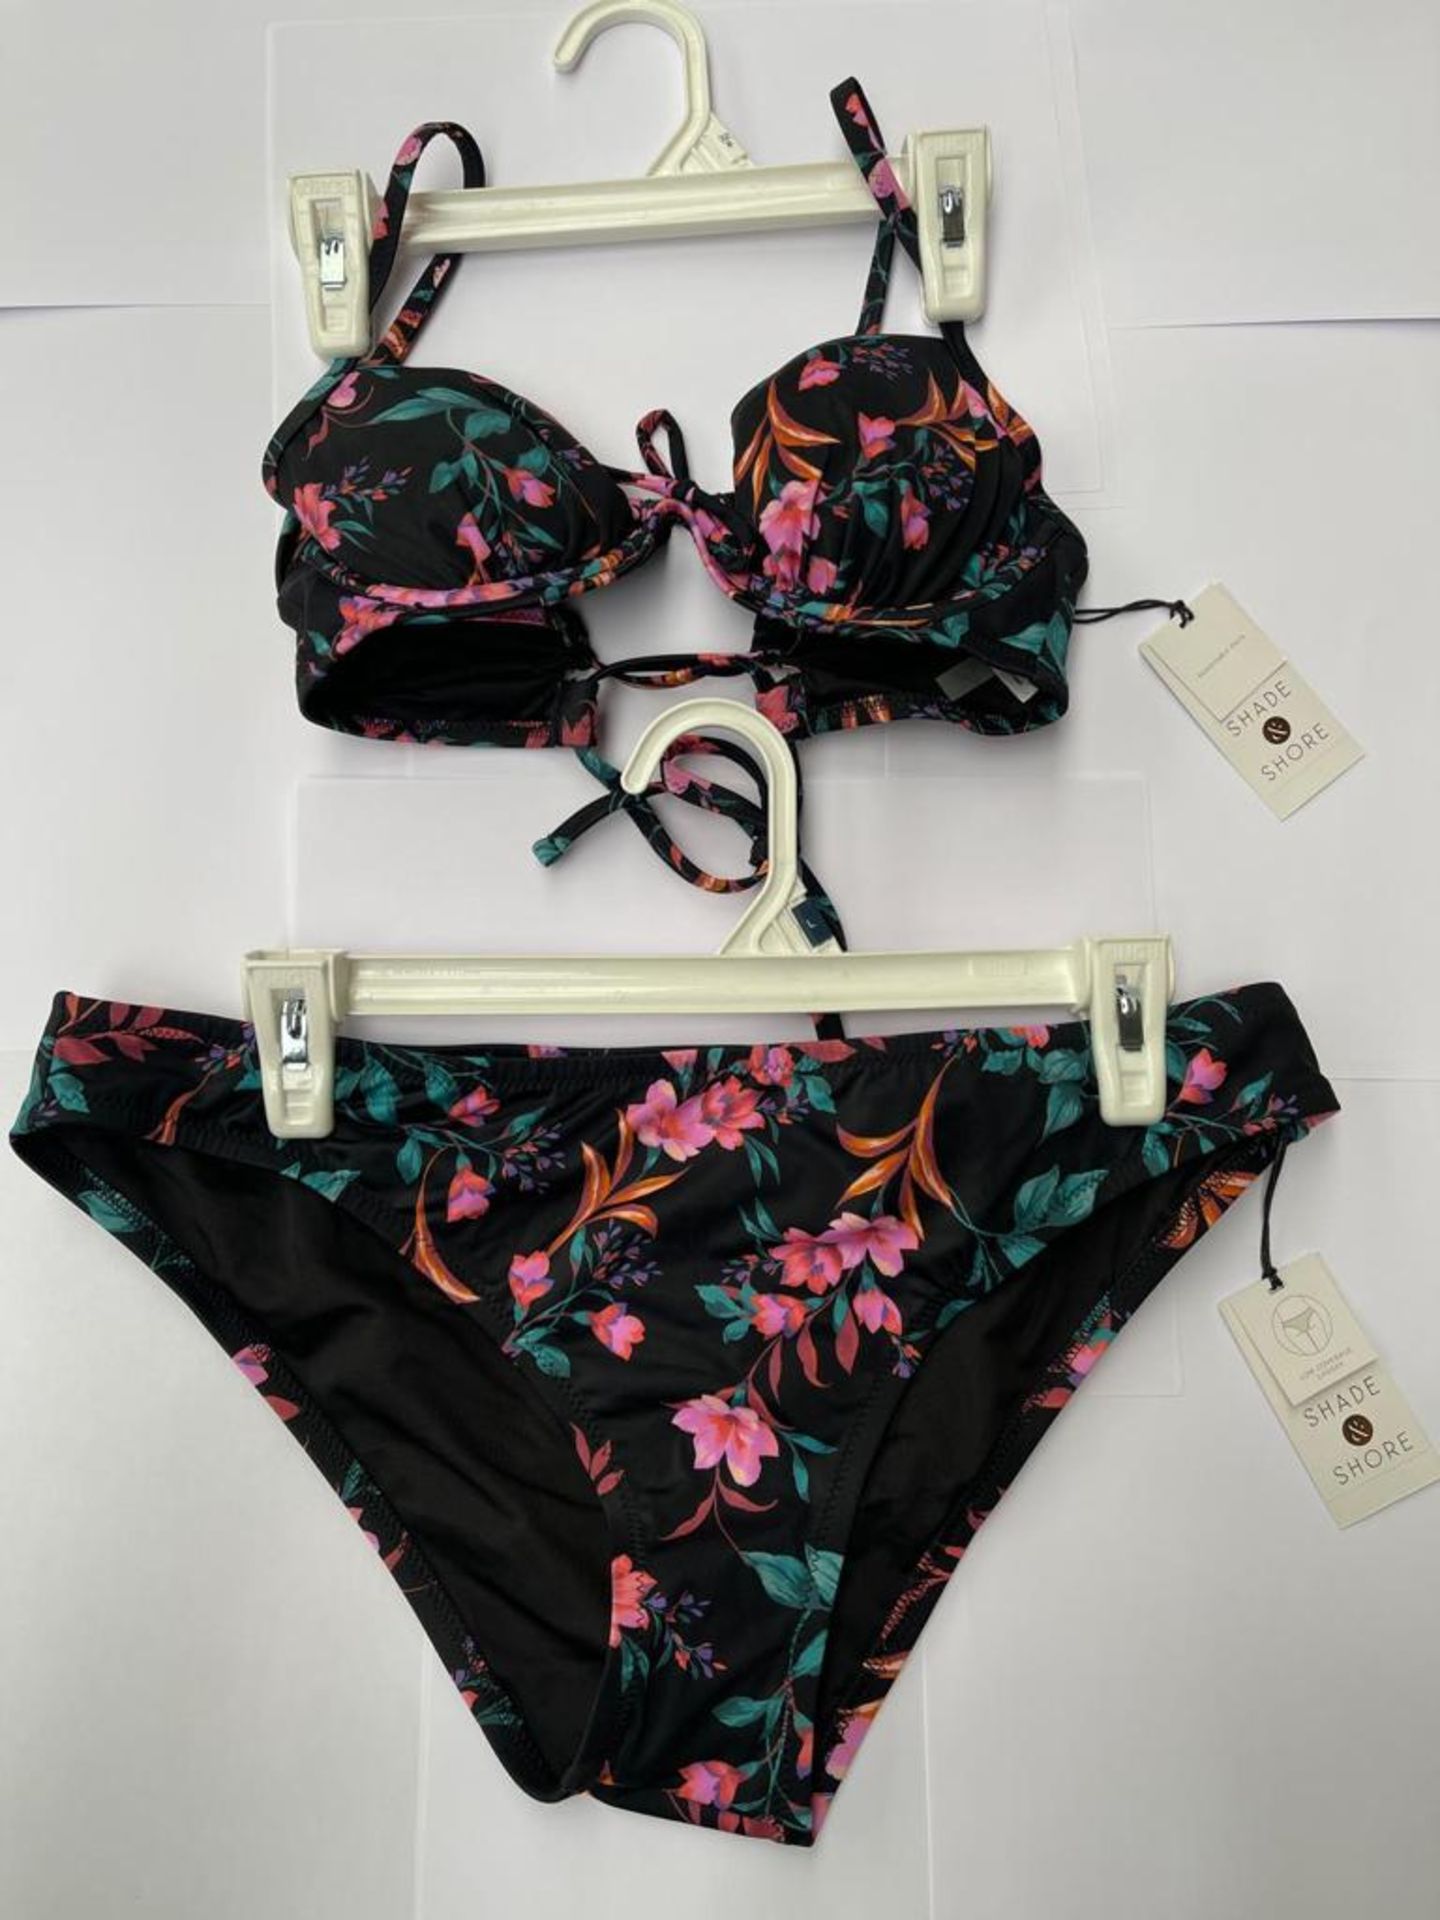 TRADE PALLET TO CONTAIN 684x TOTAL PIECES OF BRAND NEW SHADE & SHORE Black/Floral Bikini Tops &